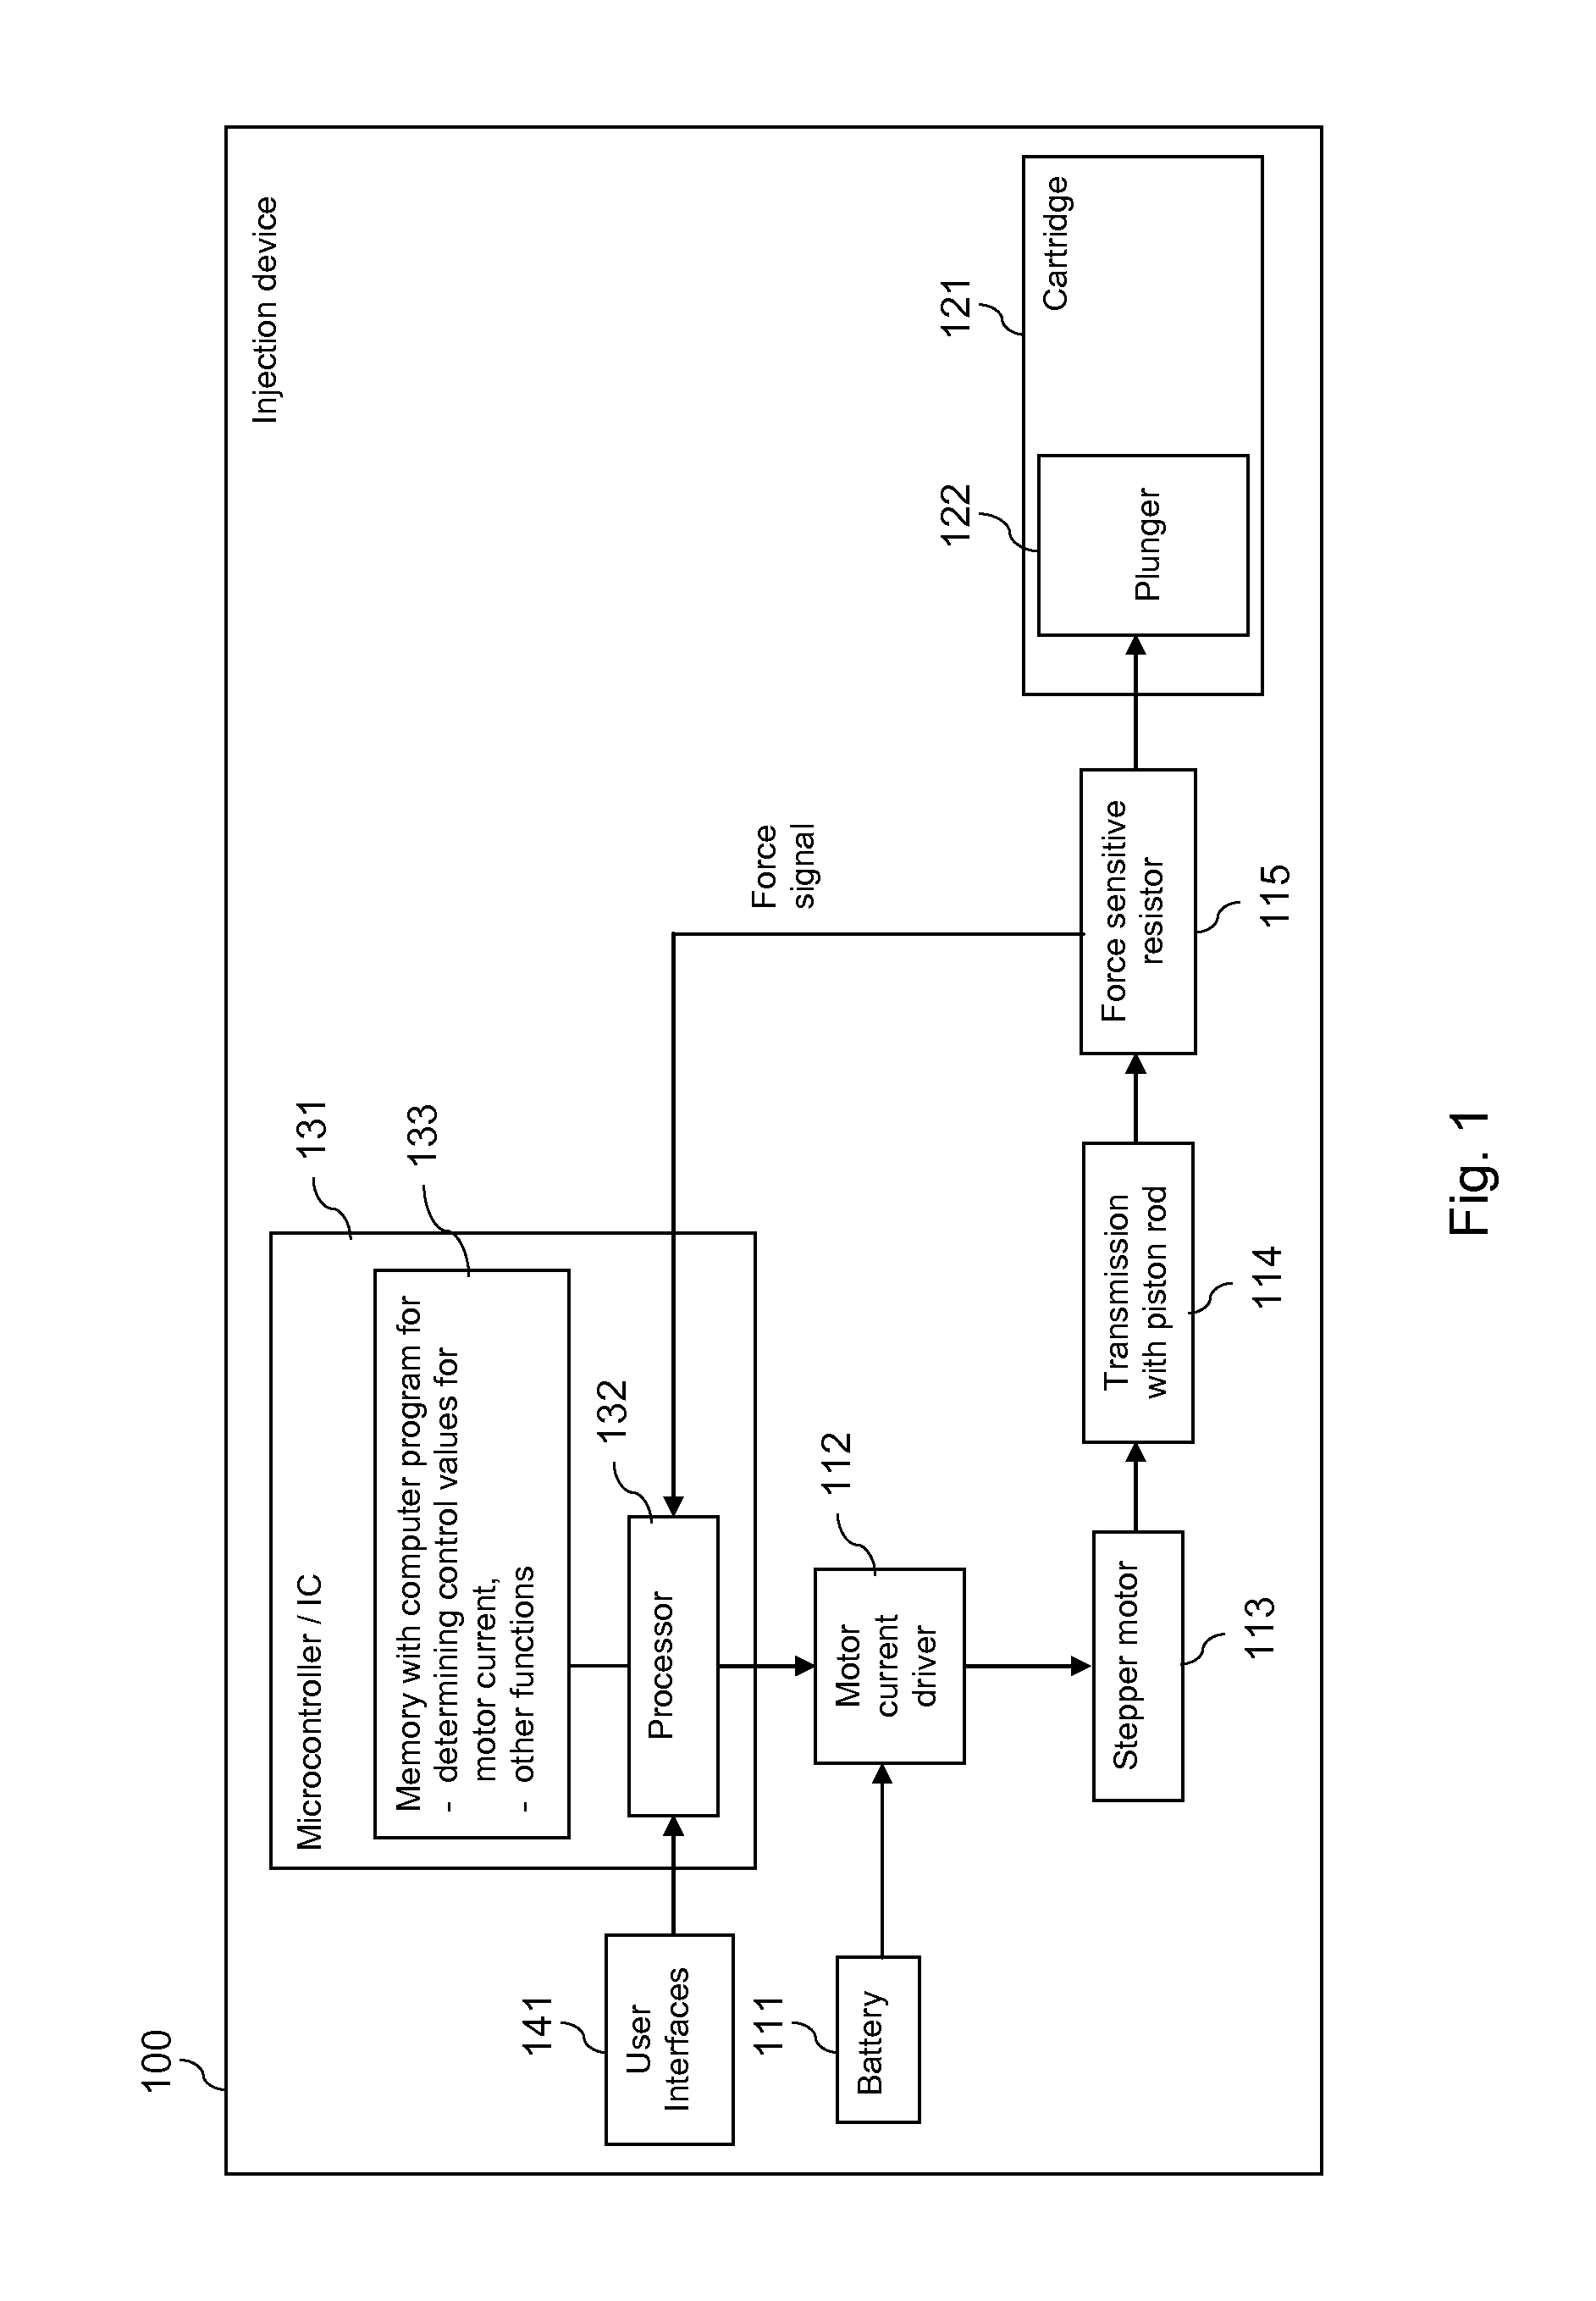 Controlling a motor of an injection device